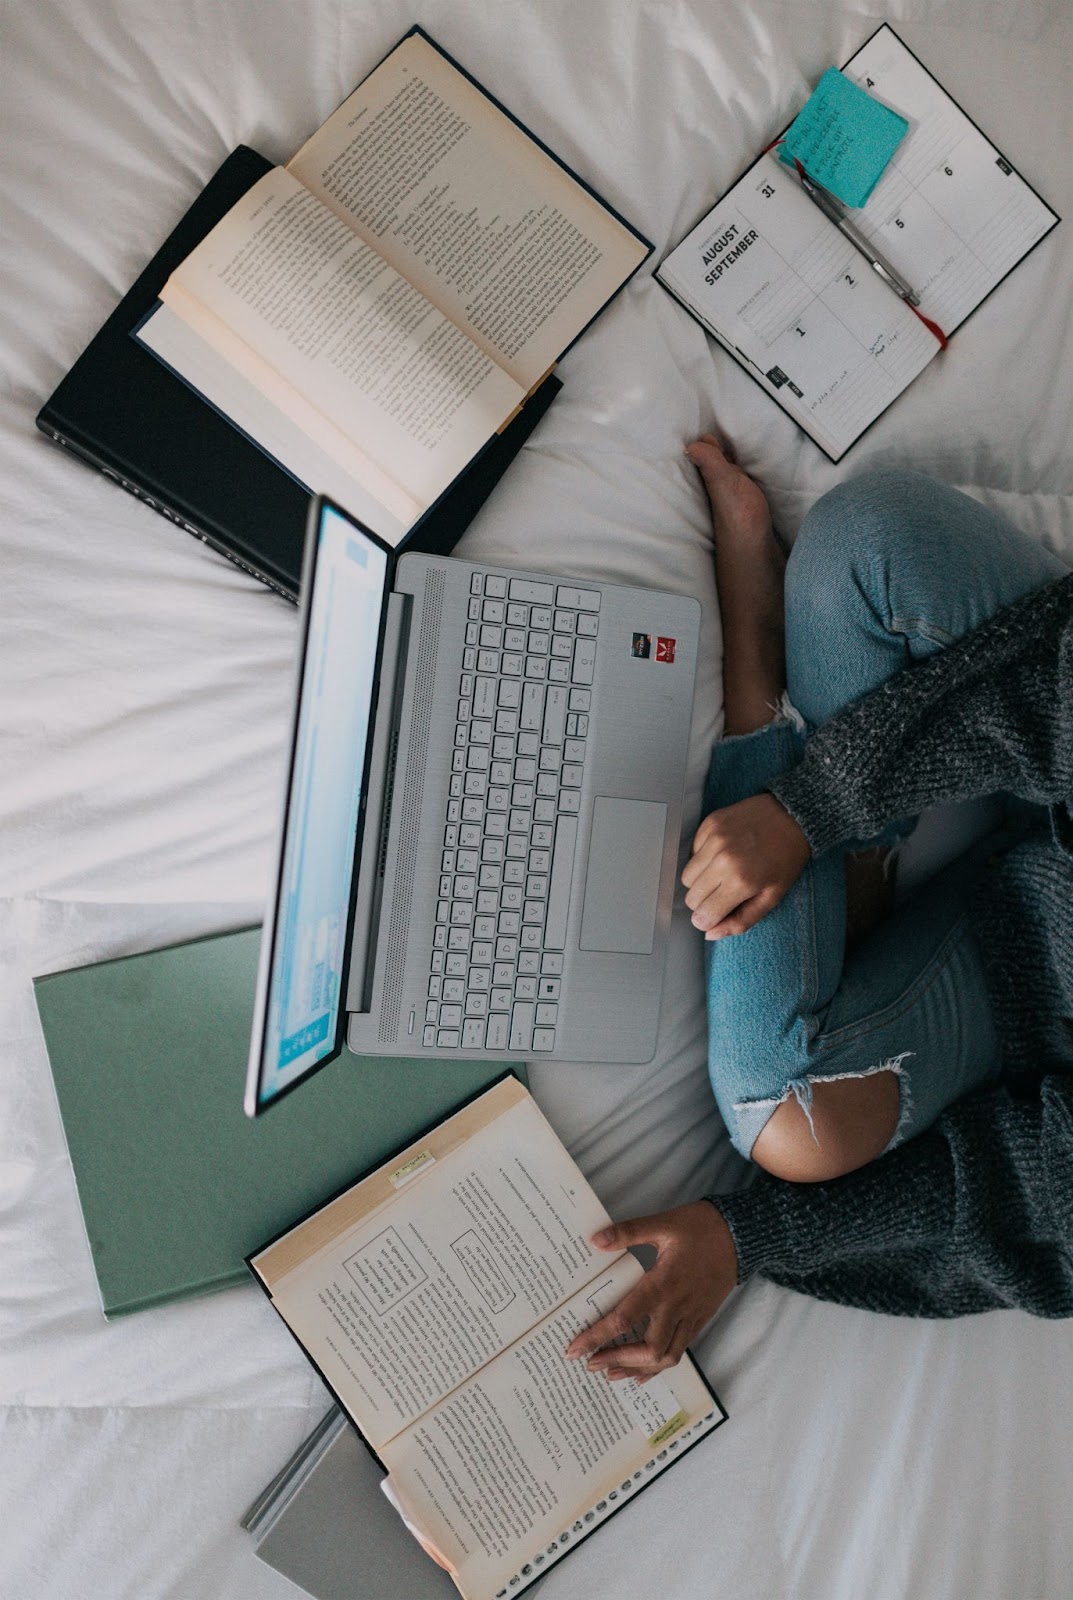 An overhead shot of woman sitting cross-legged on a bed with a laptop, several books and a day planner surrounding her.